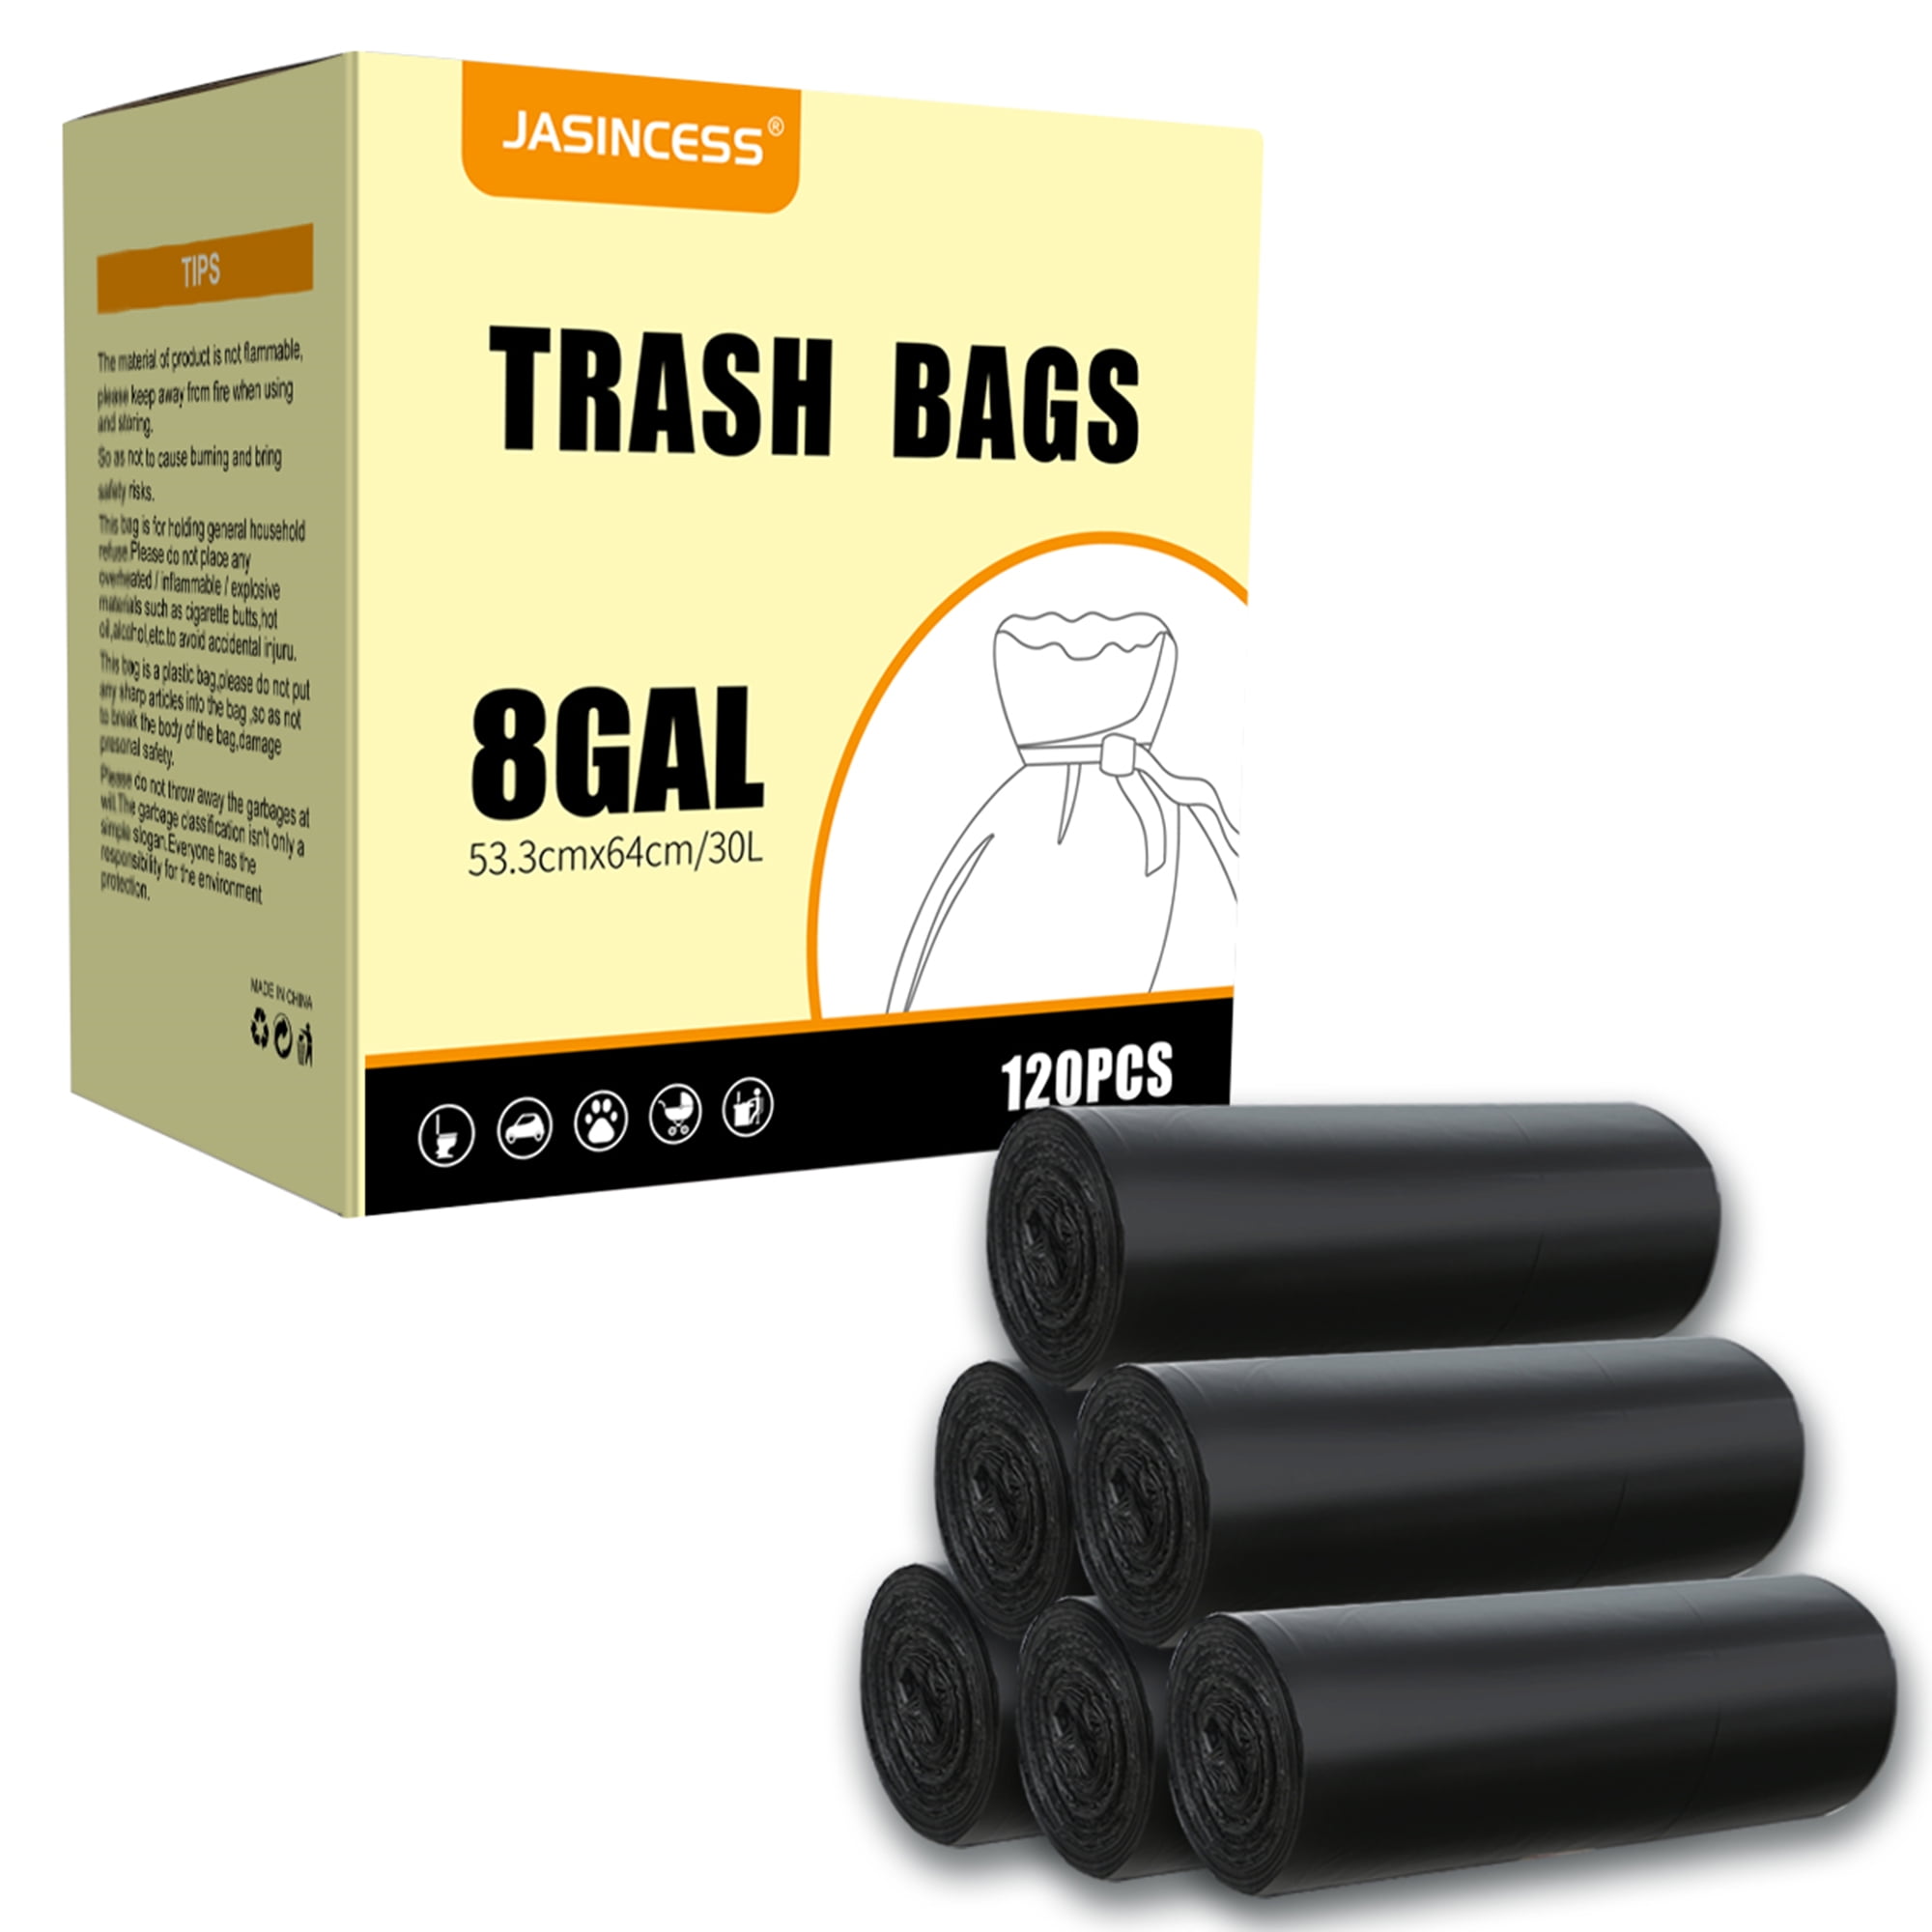 8 Gallon Plastic Trash Bags 120 Count Black Drawstring Thick Garbage Bags for Office Kitchen Home 22.06'' x 25.61'' (White, 8)